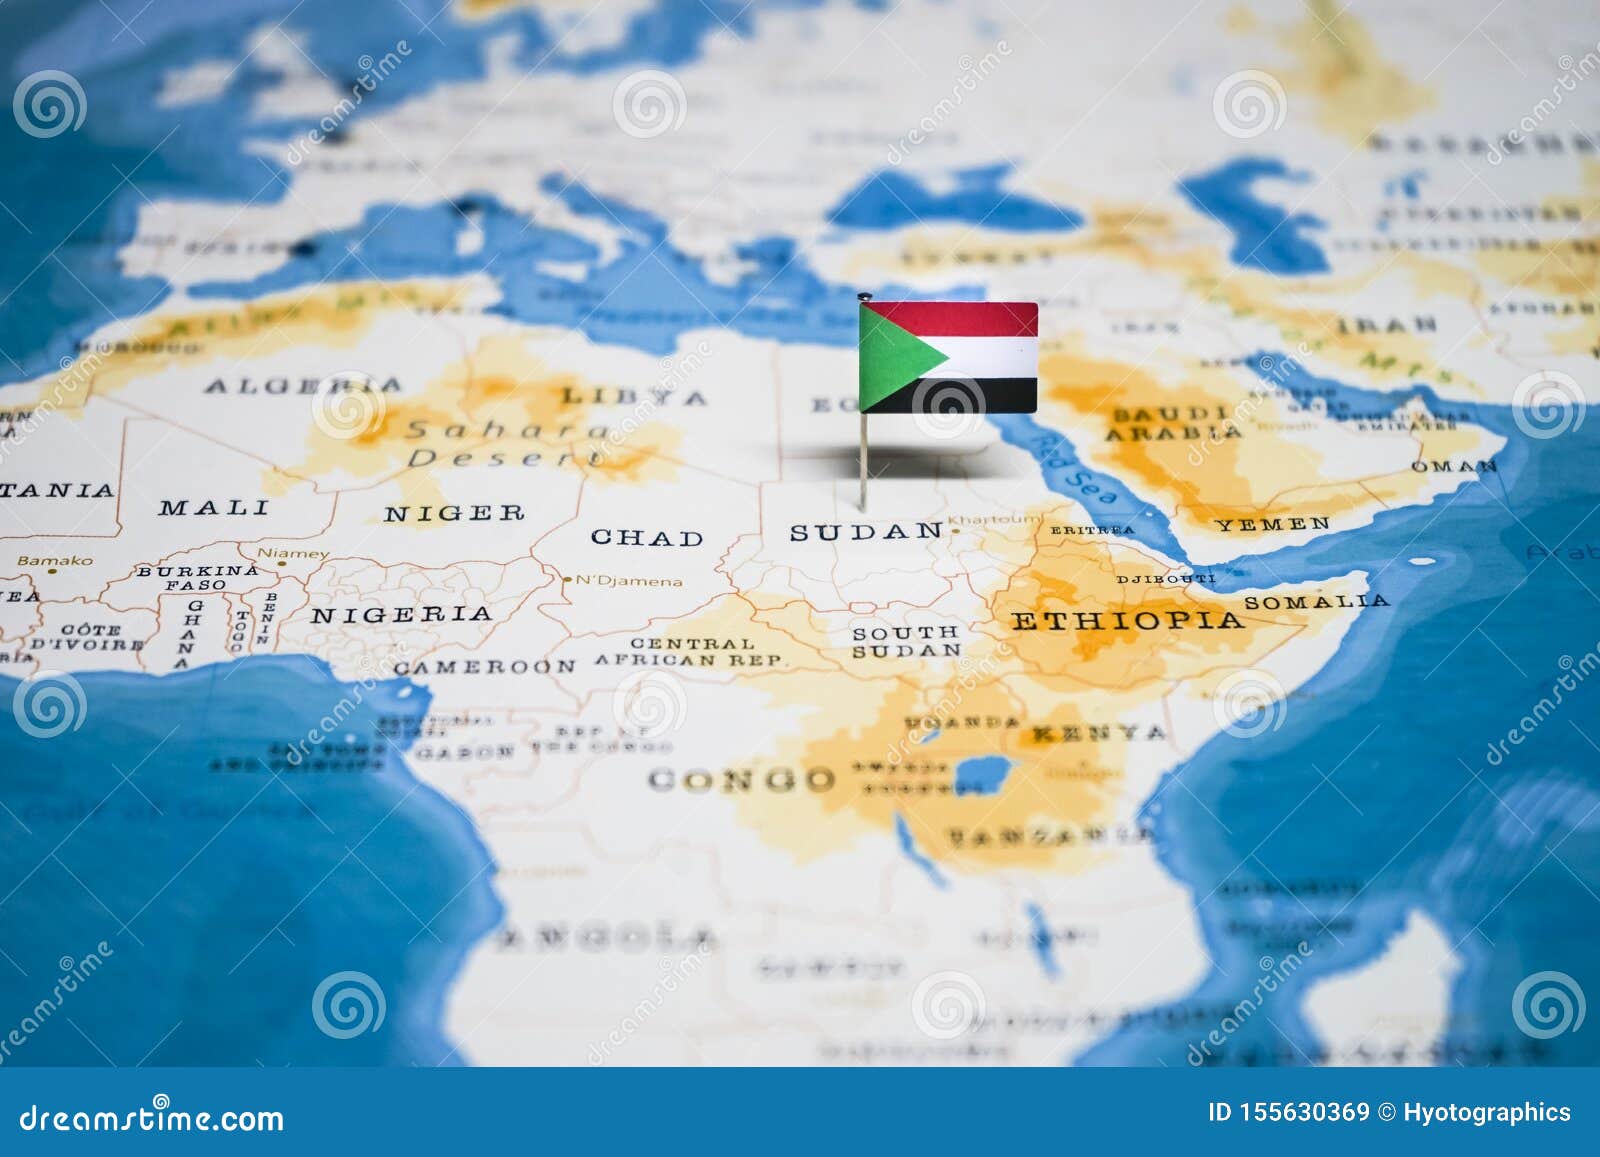 the flag of sudan in the world map